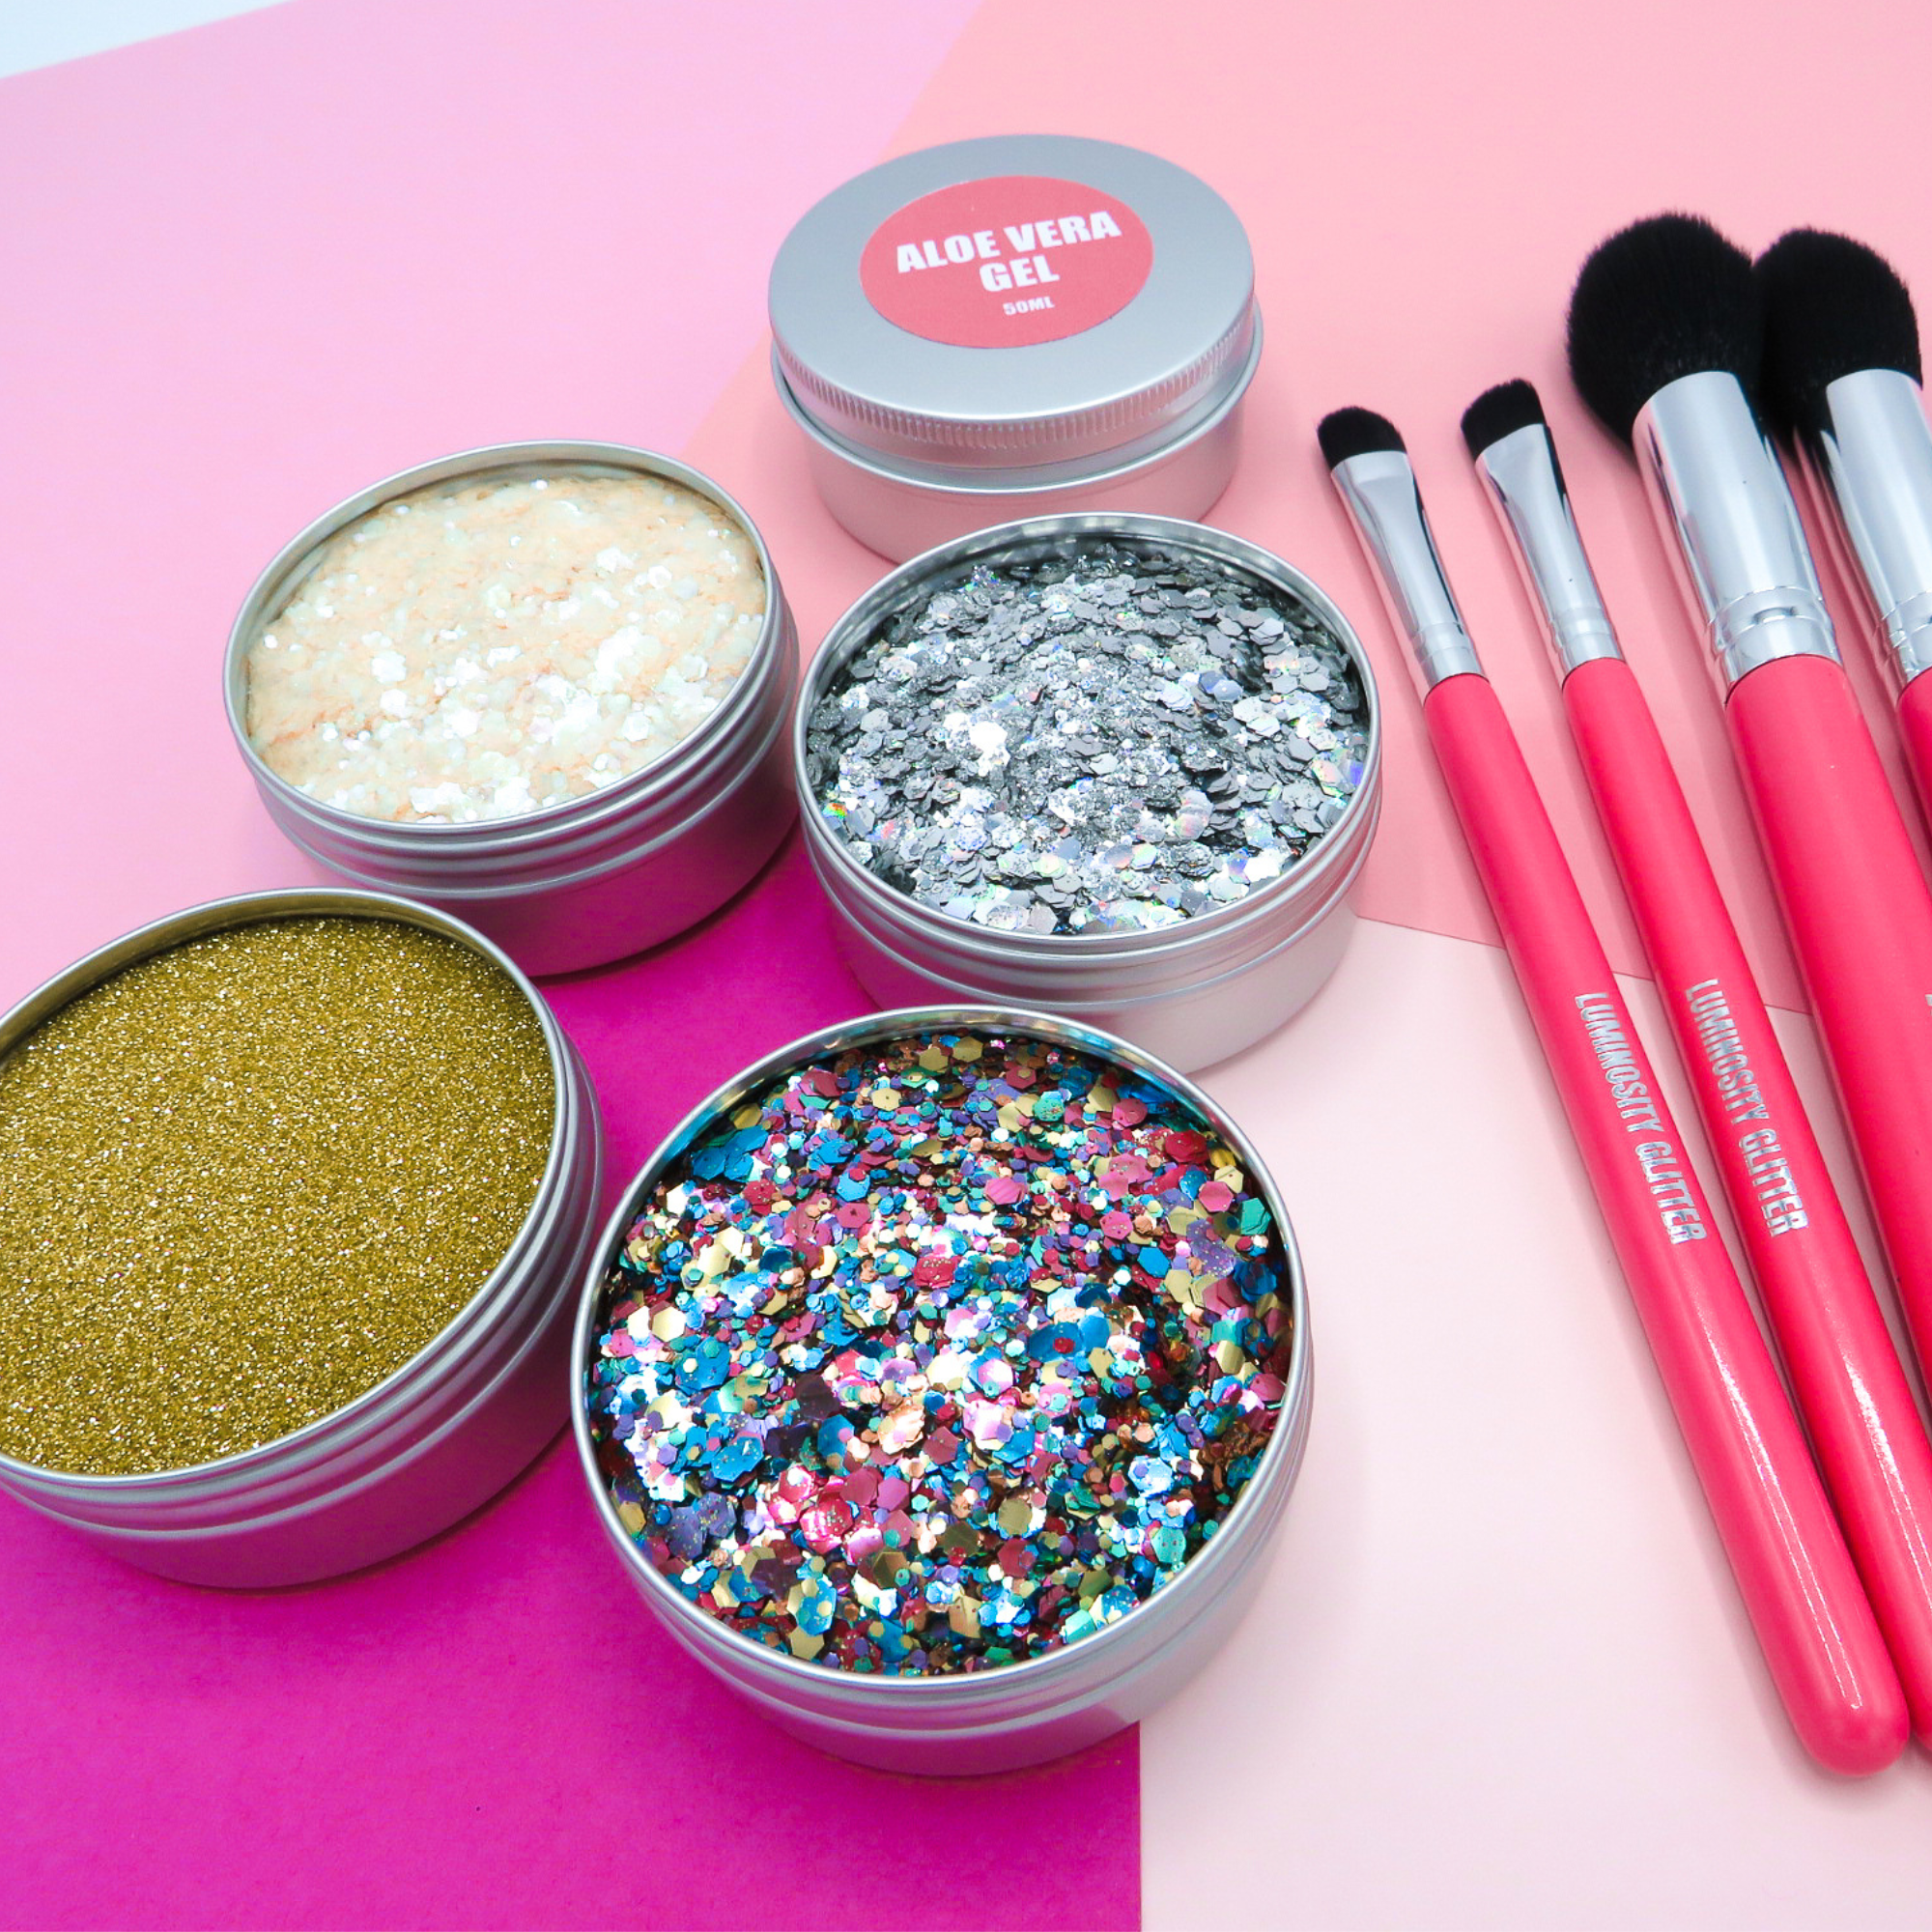 The Party eco glitter bar kit by Luminosity Glitter in London.